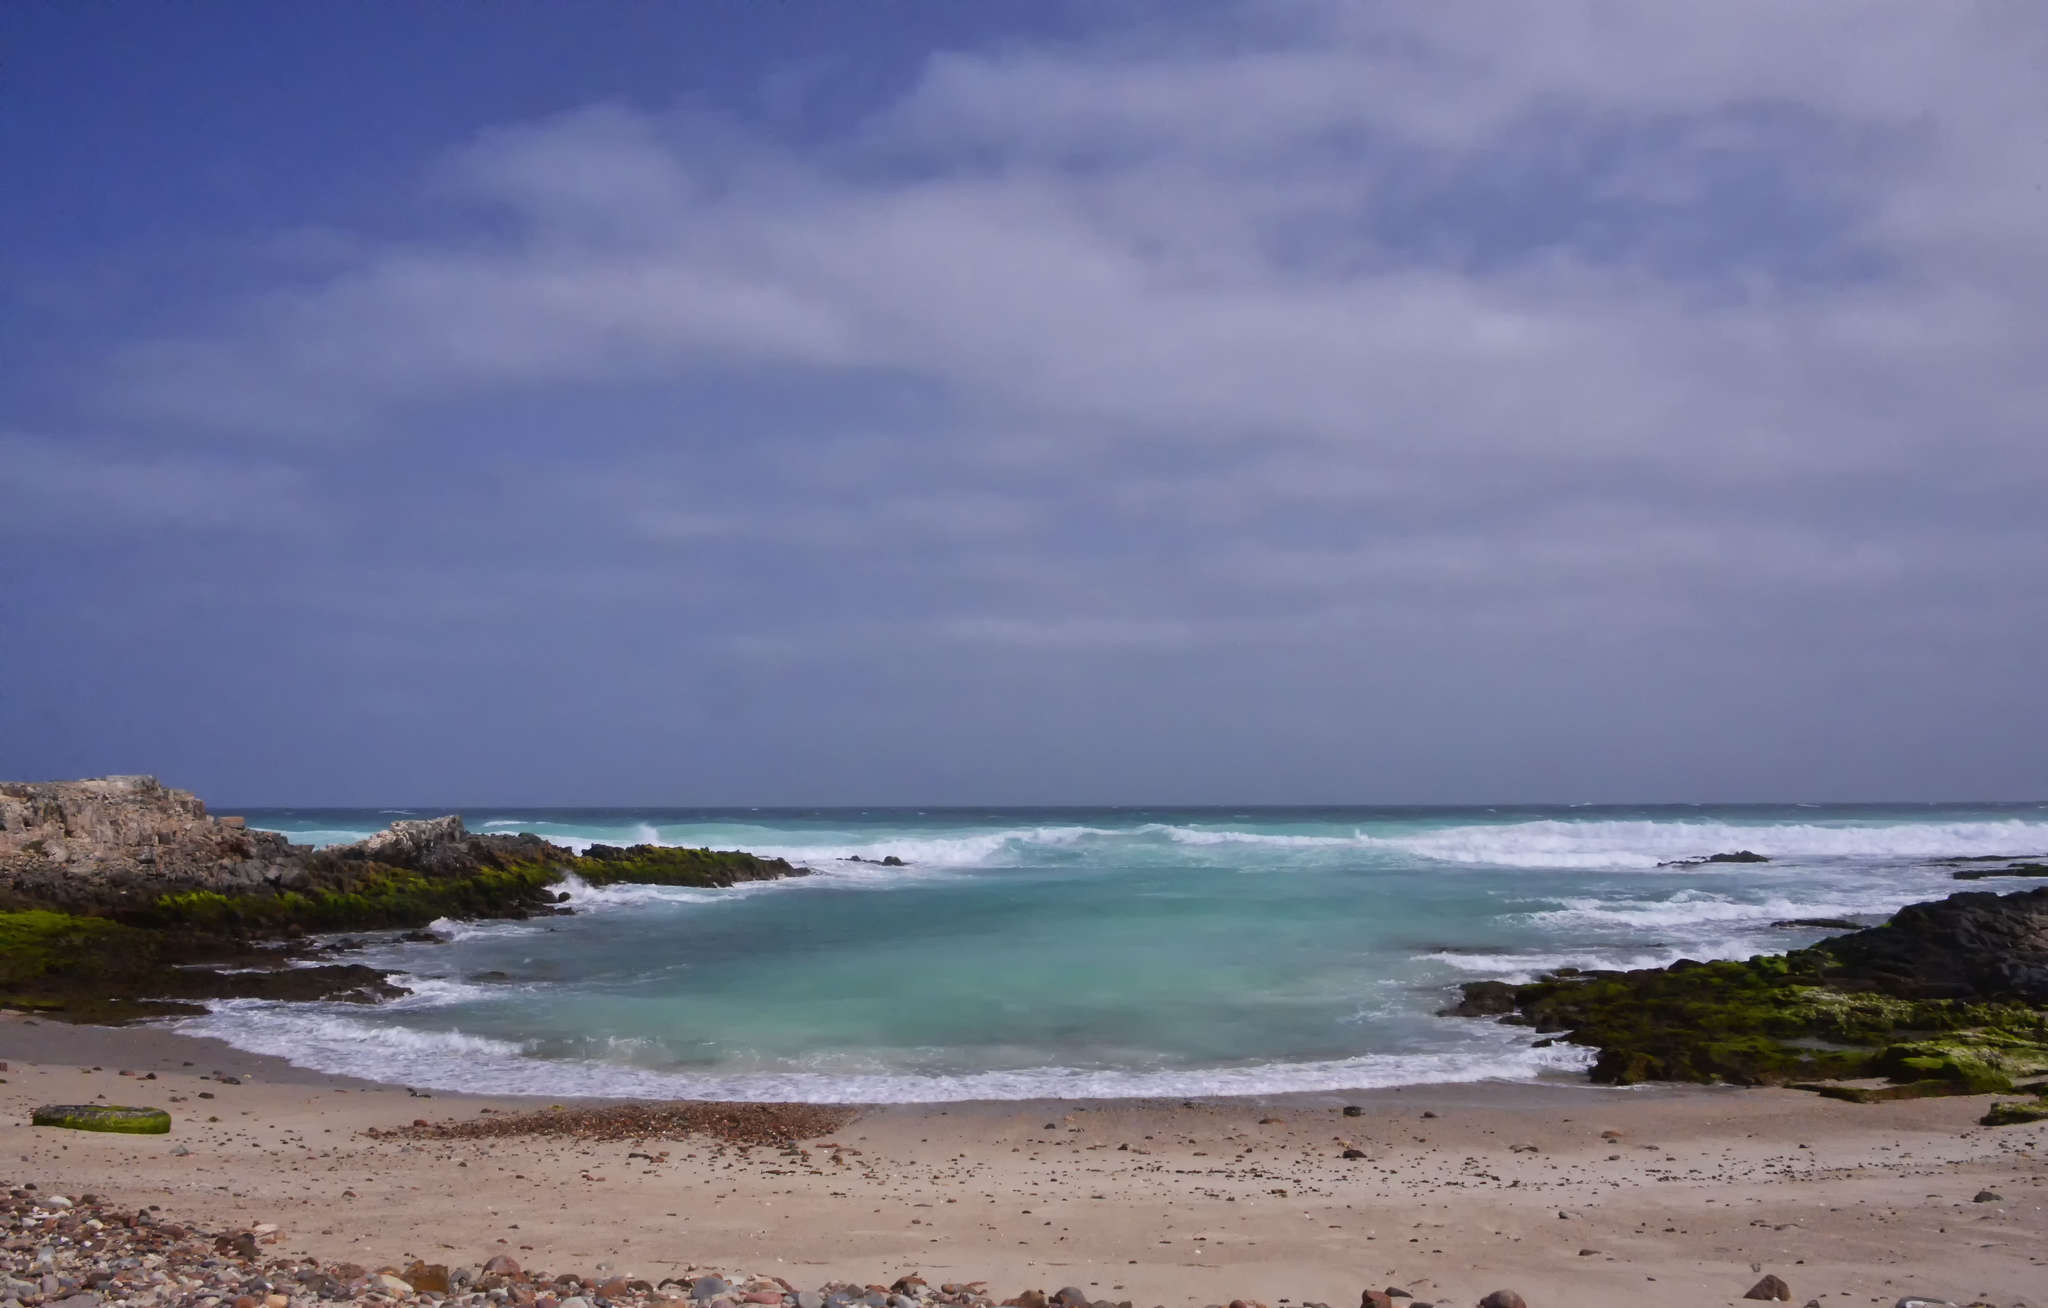 Travelling to Socotra Island